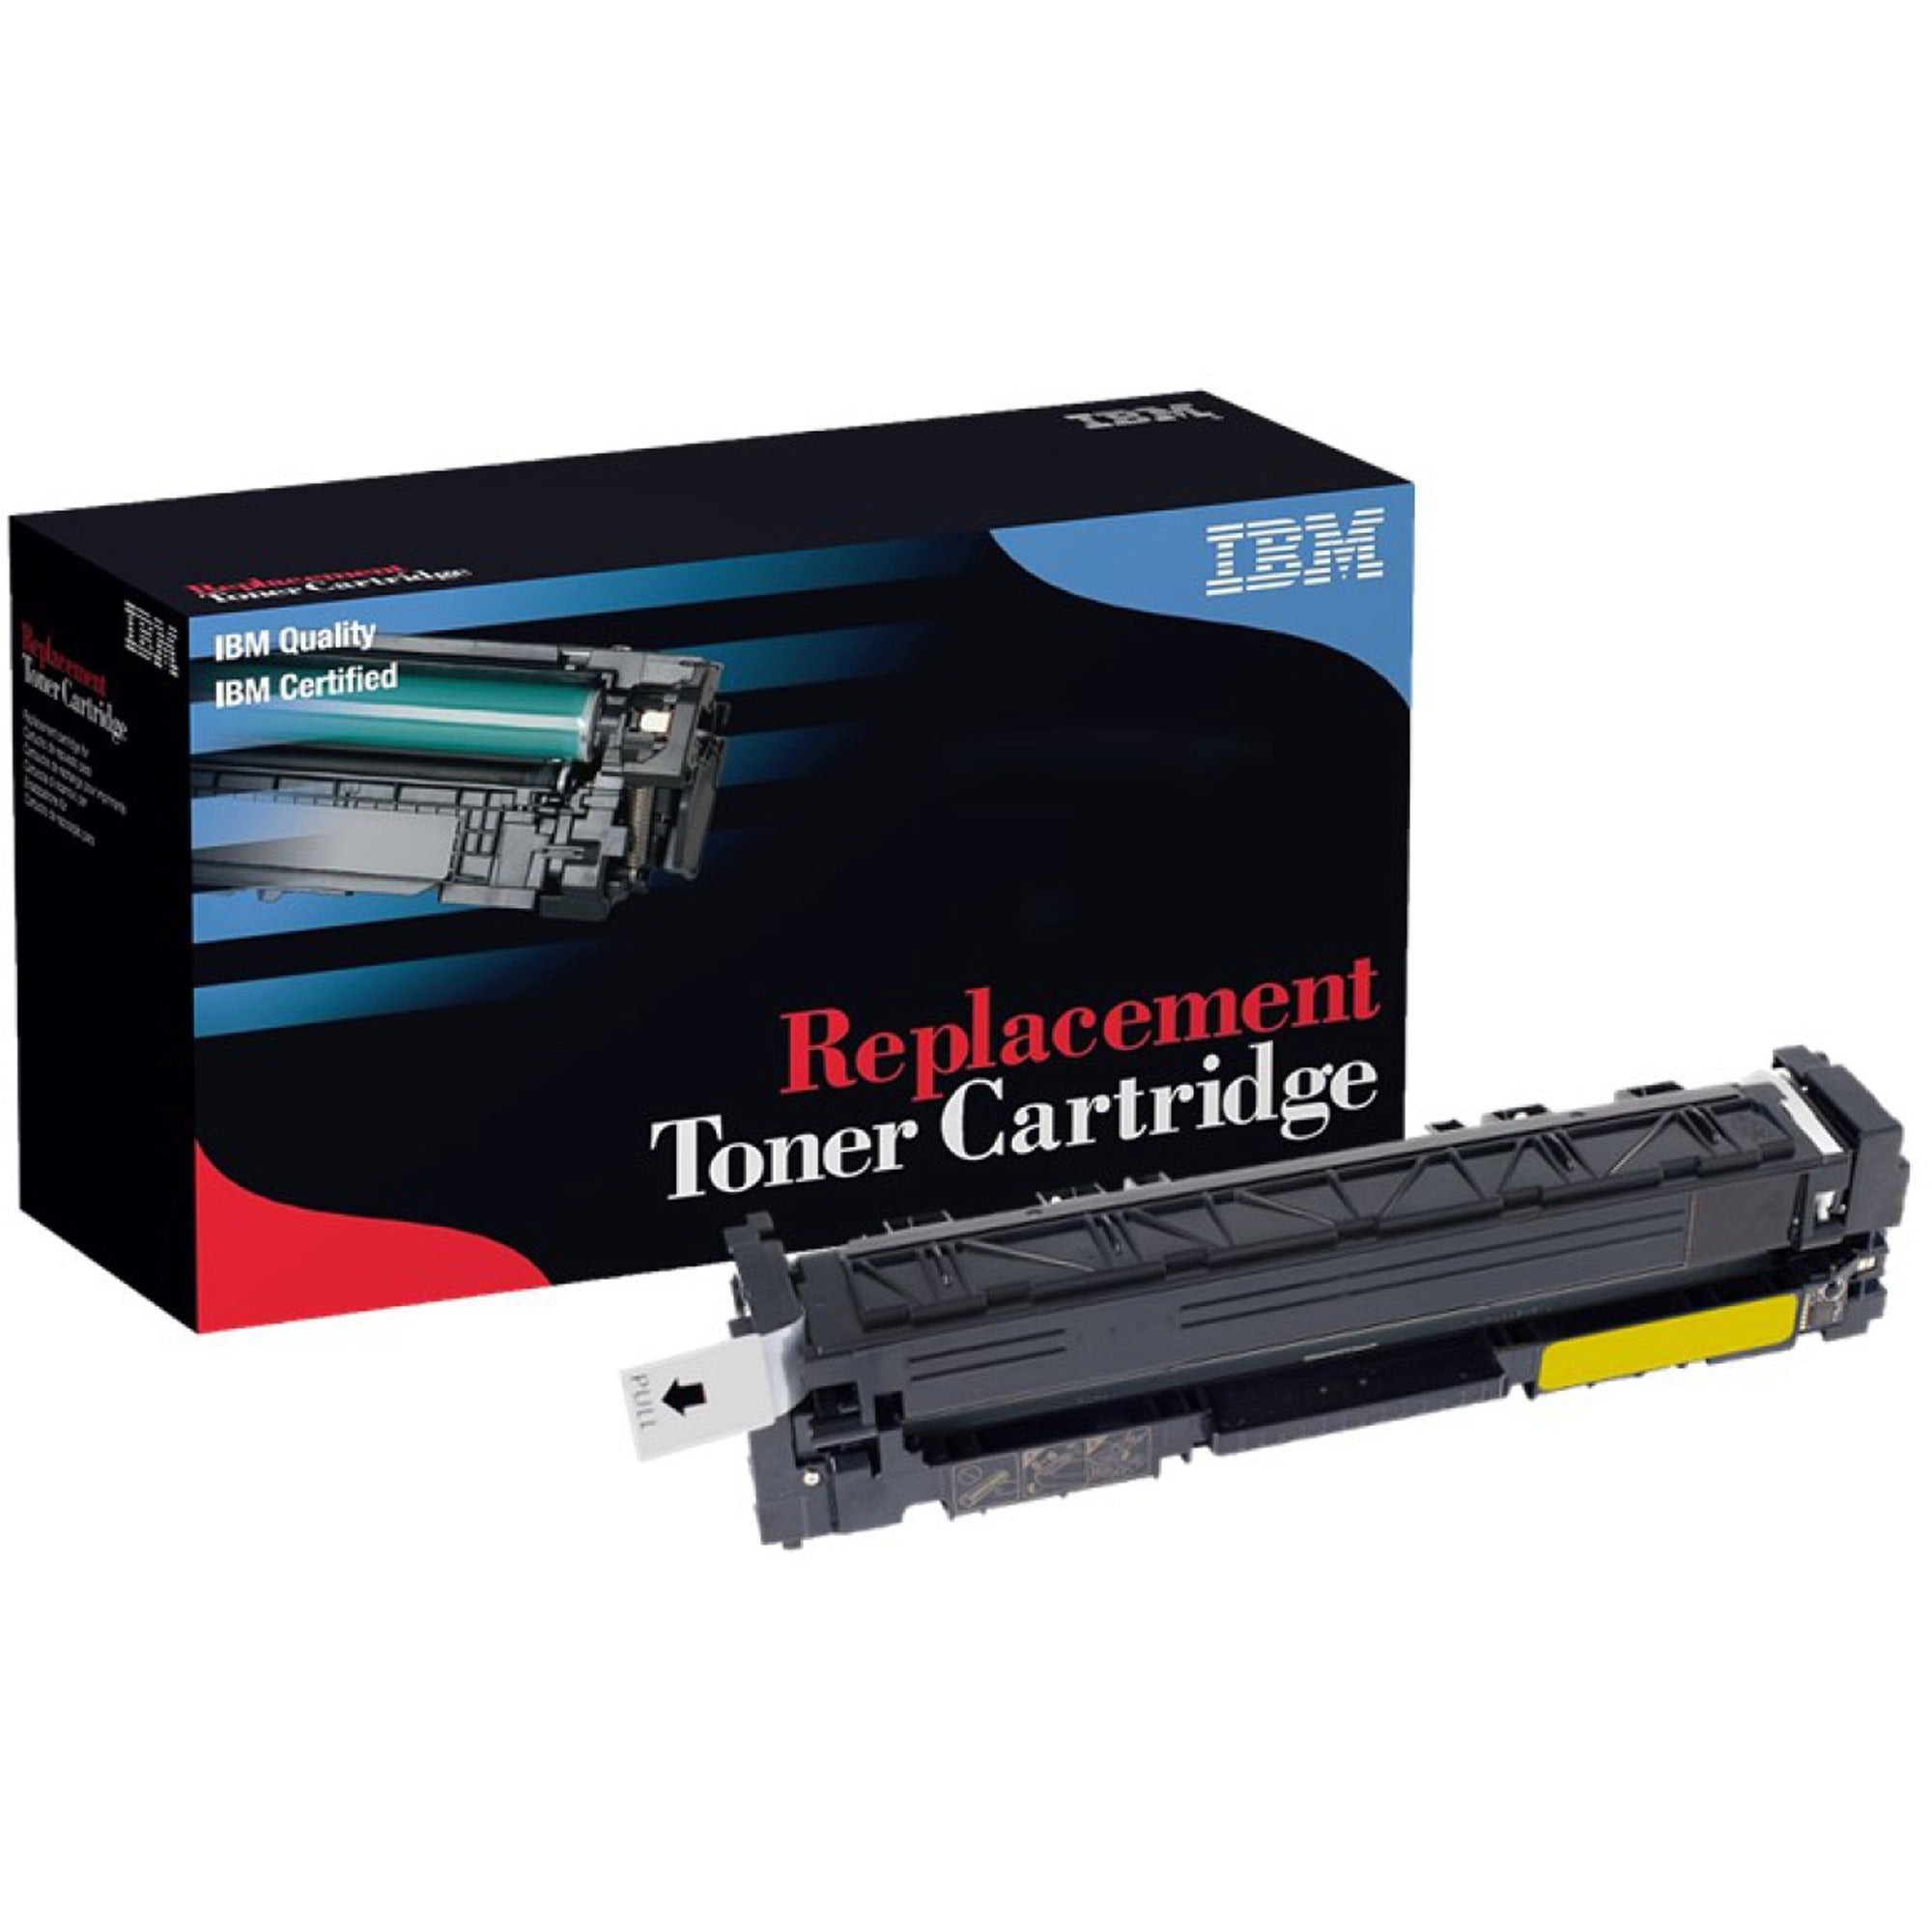 ibm-laser-toner-cartridge-alternative-for-hp-655a-cf452a-yellow-1-each-10500-pages_ibmtg95p6698 - 1